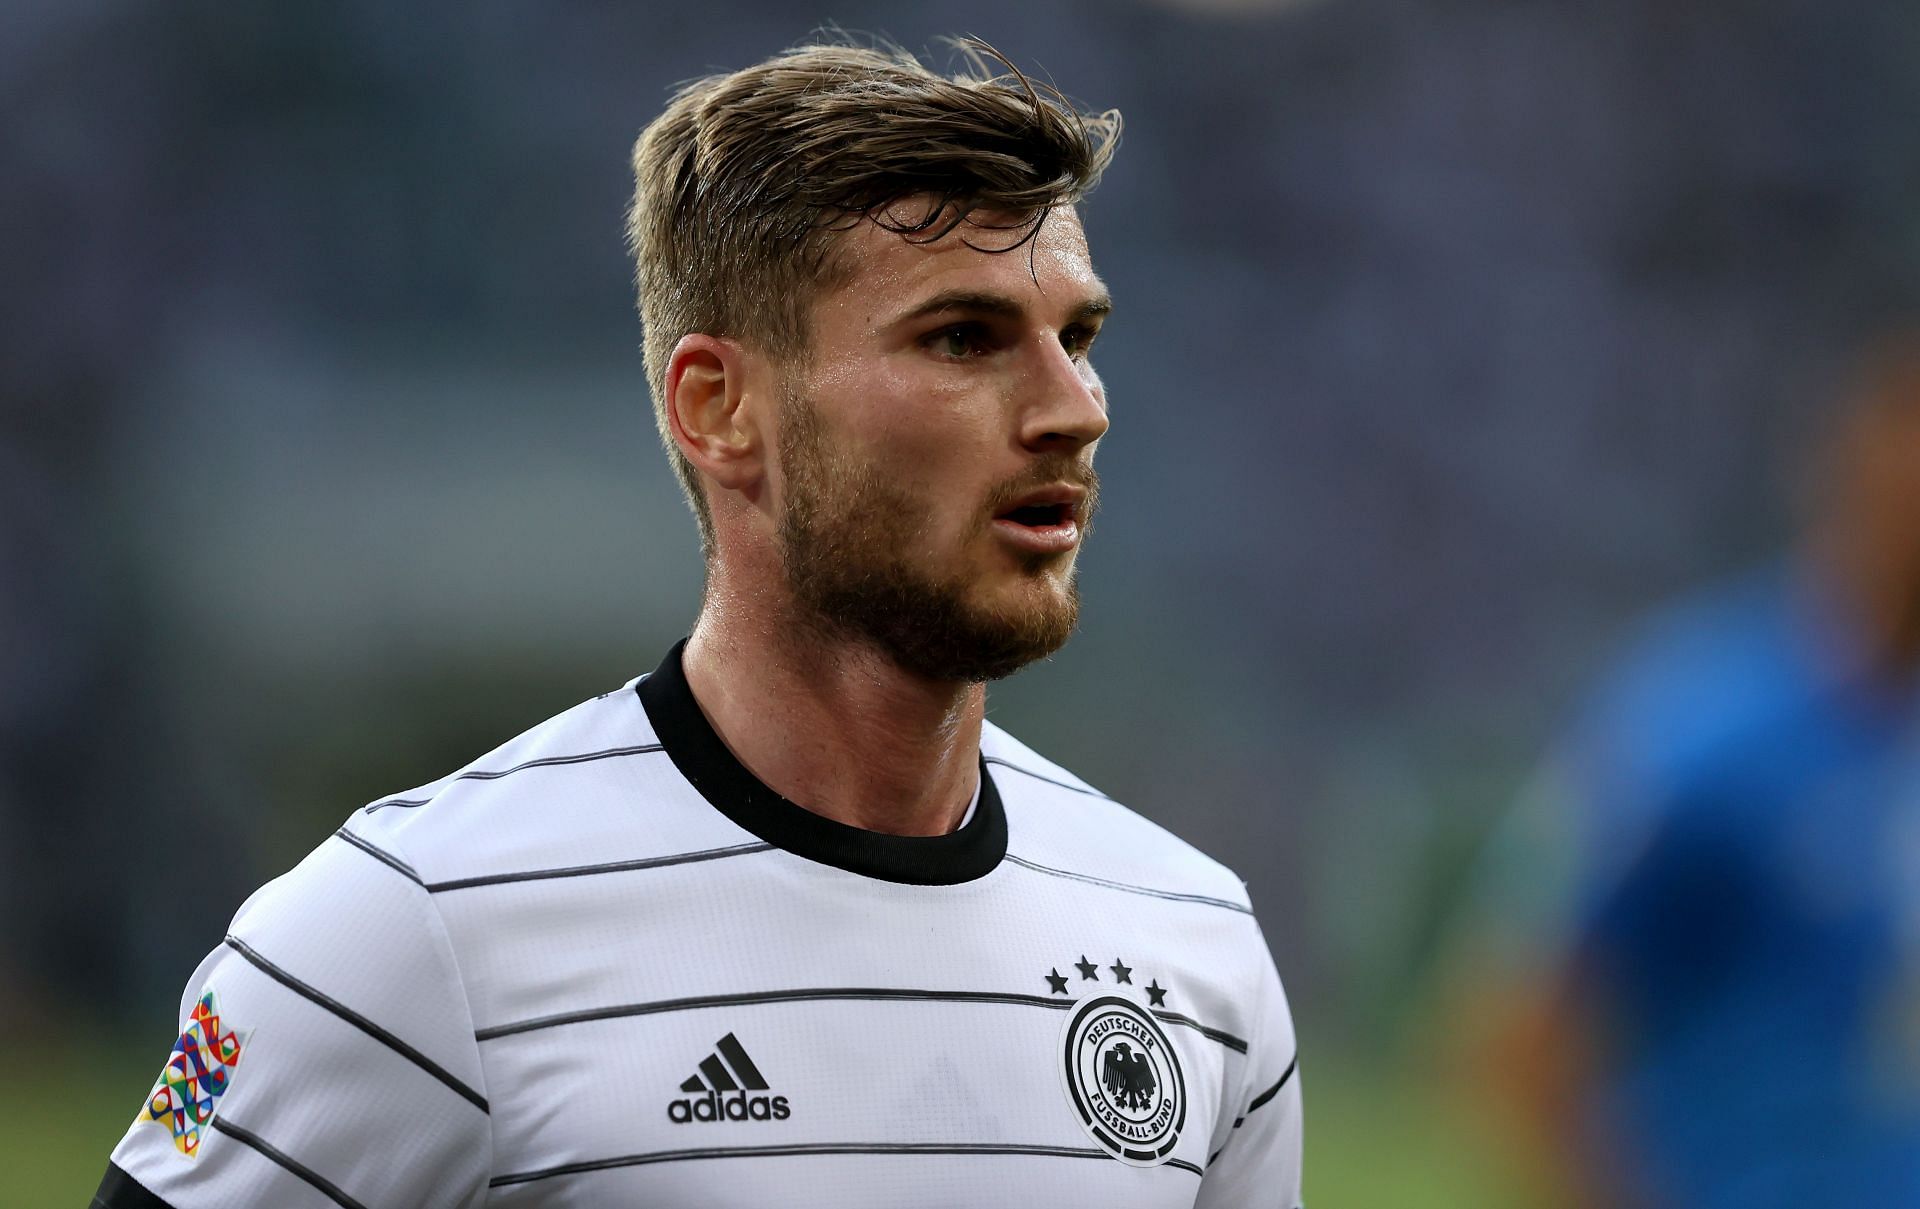 Timo Werner could leave Chelsea this summer.